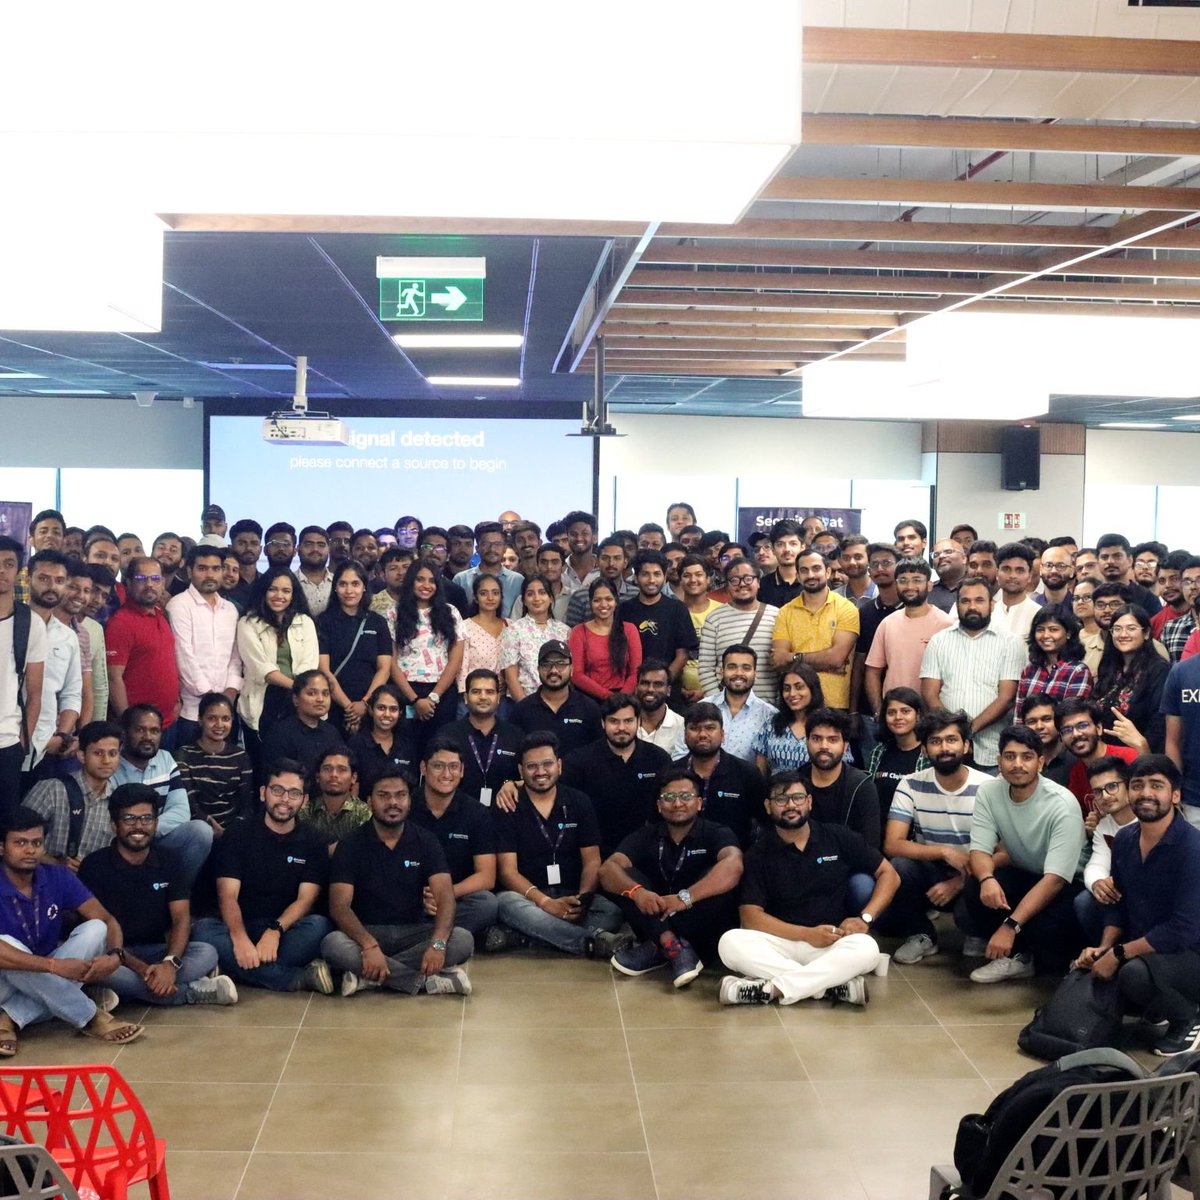 Exciting weekend at @navifinance  for SecurityBoat's Bengaluru Meetup! Learned about the role of AI Product Managers in shaping product strategies. Impressive demo of Hawkeye scanner by Rohit from Groww, eager to contribute! Thanks to speakers Rammohan Thirupasur & @rohitcoder !